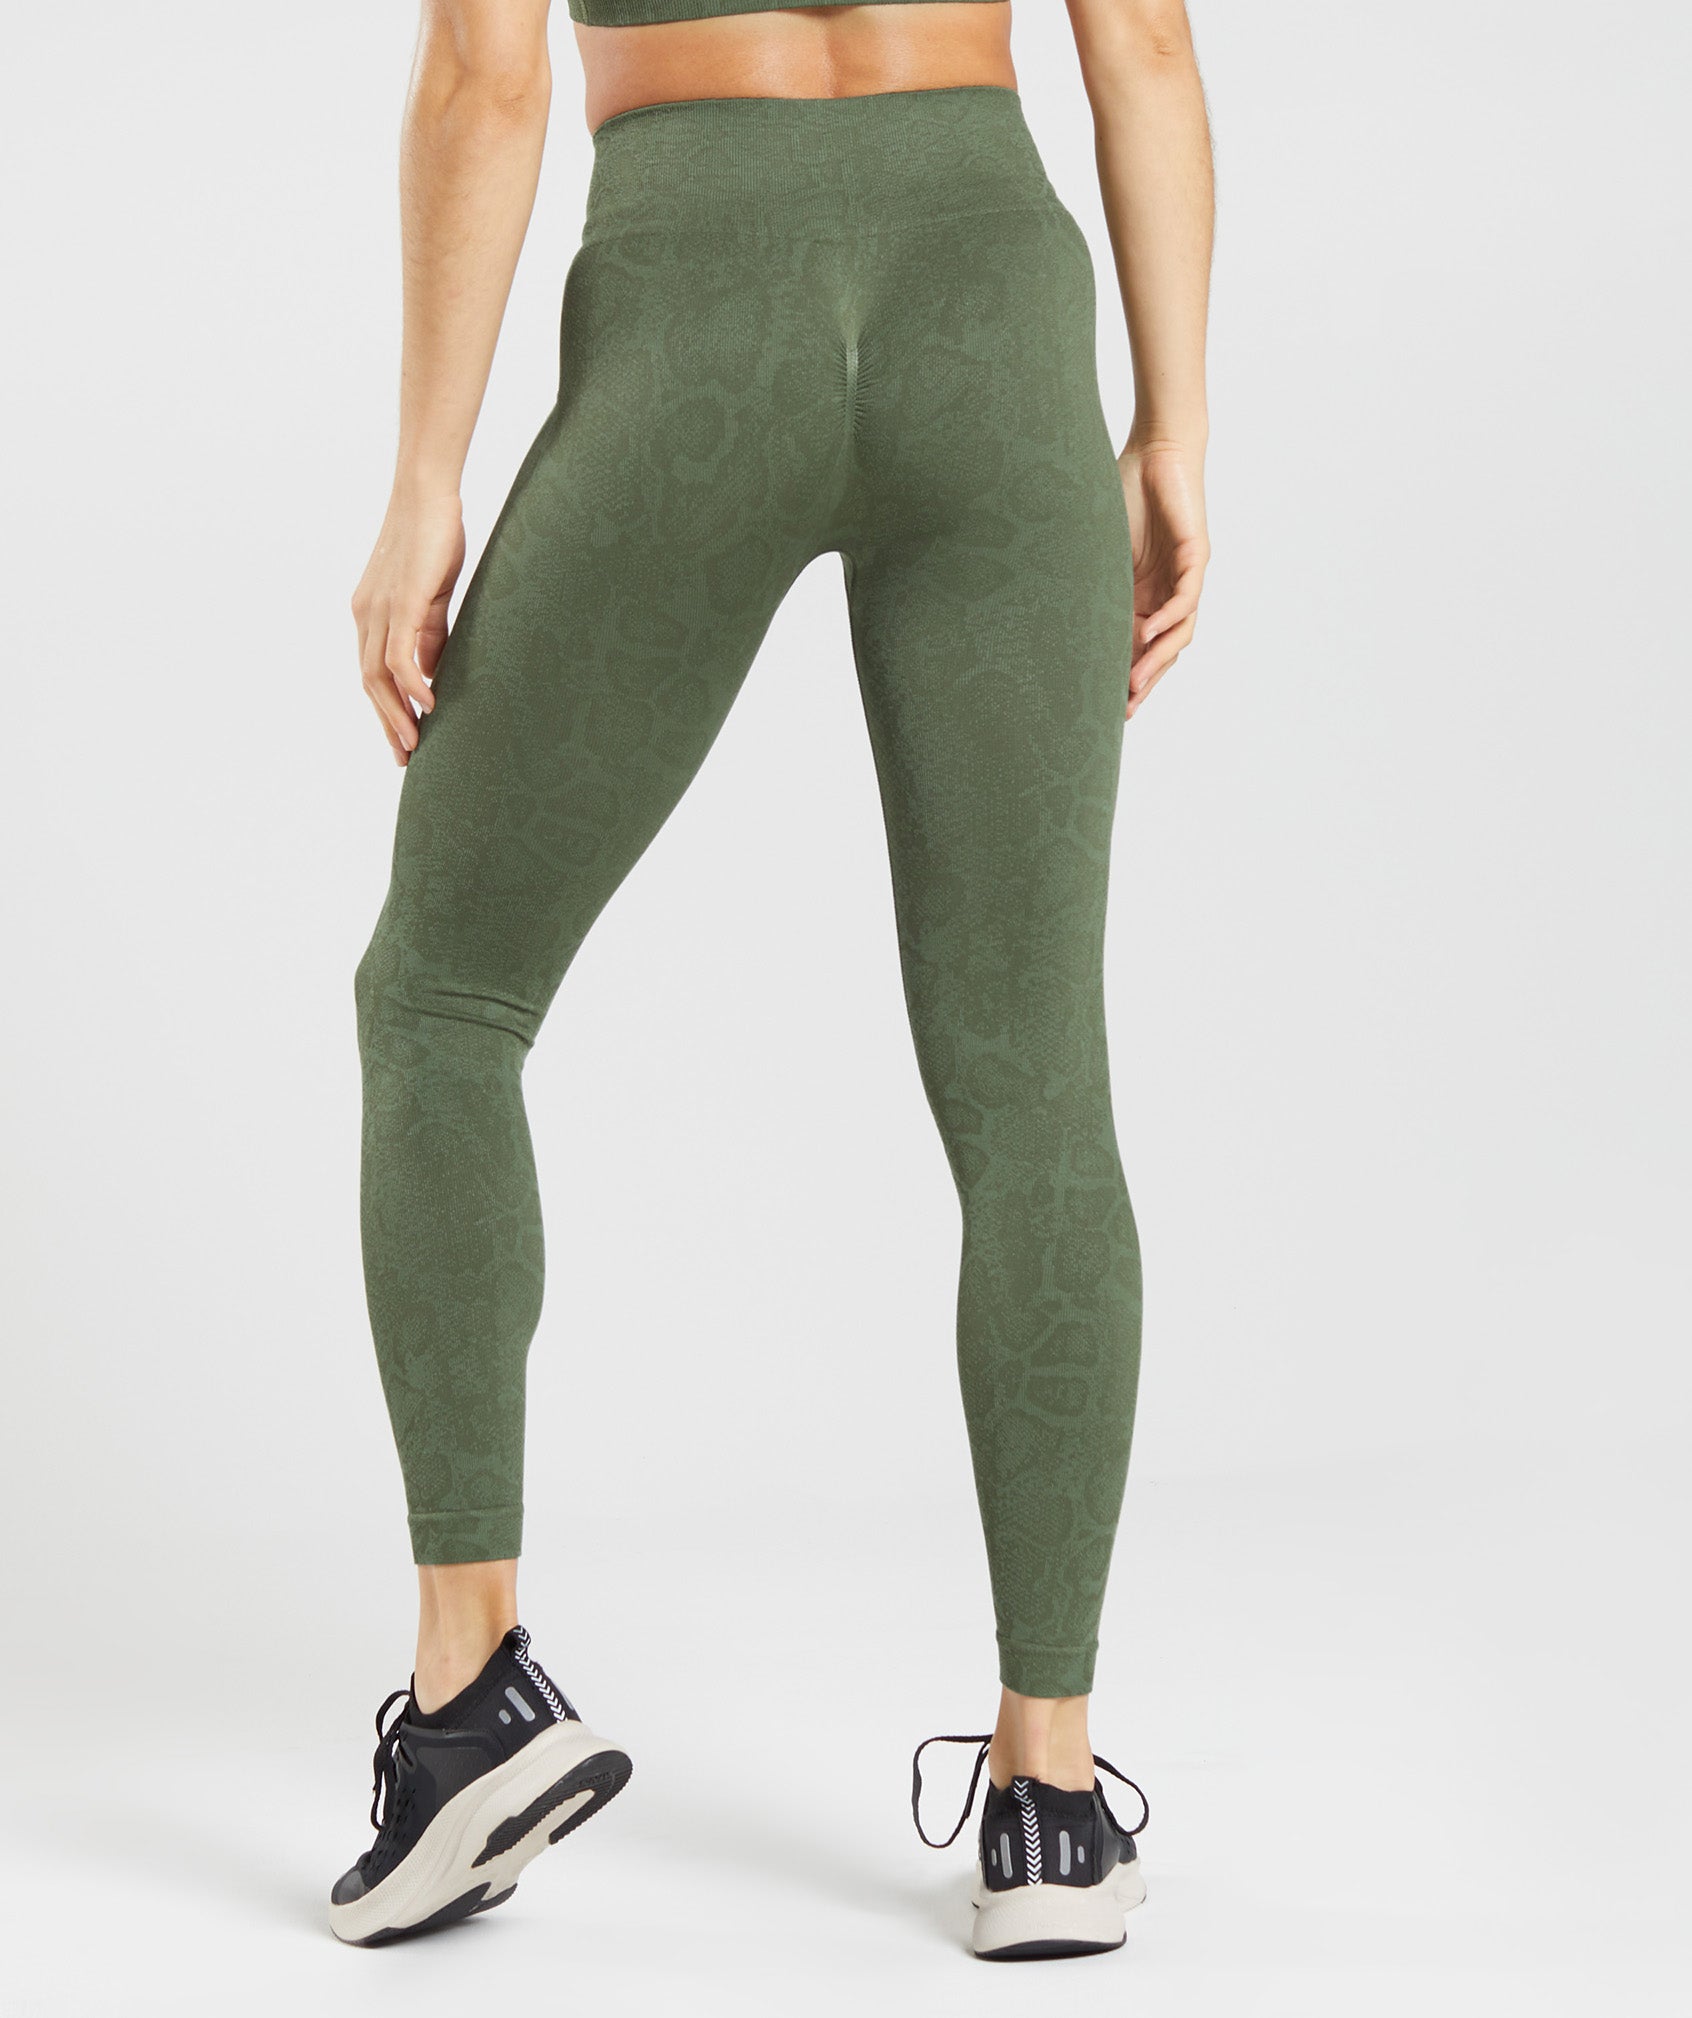 Sustainable Leggings From Europe - The Green Edition